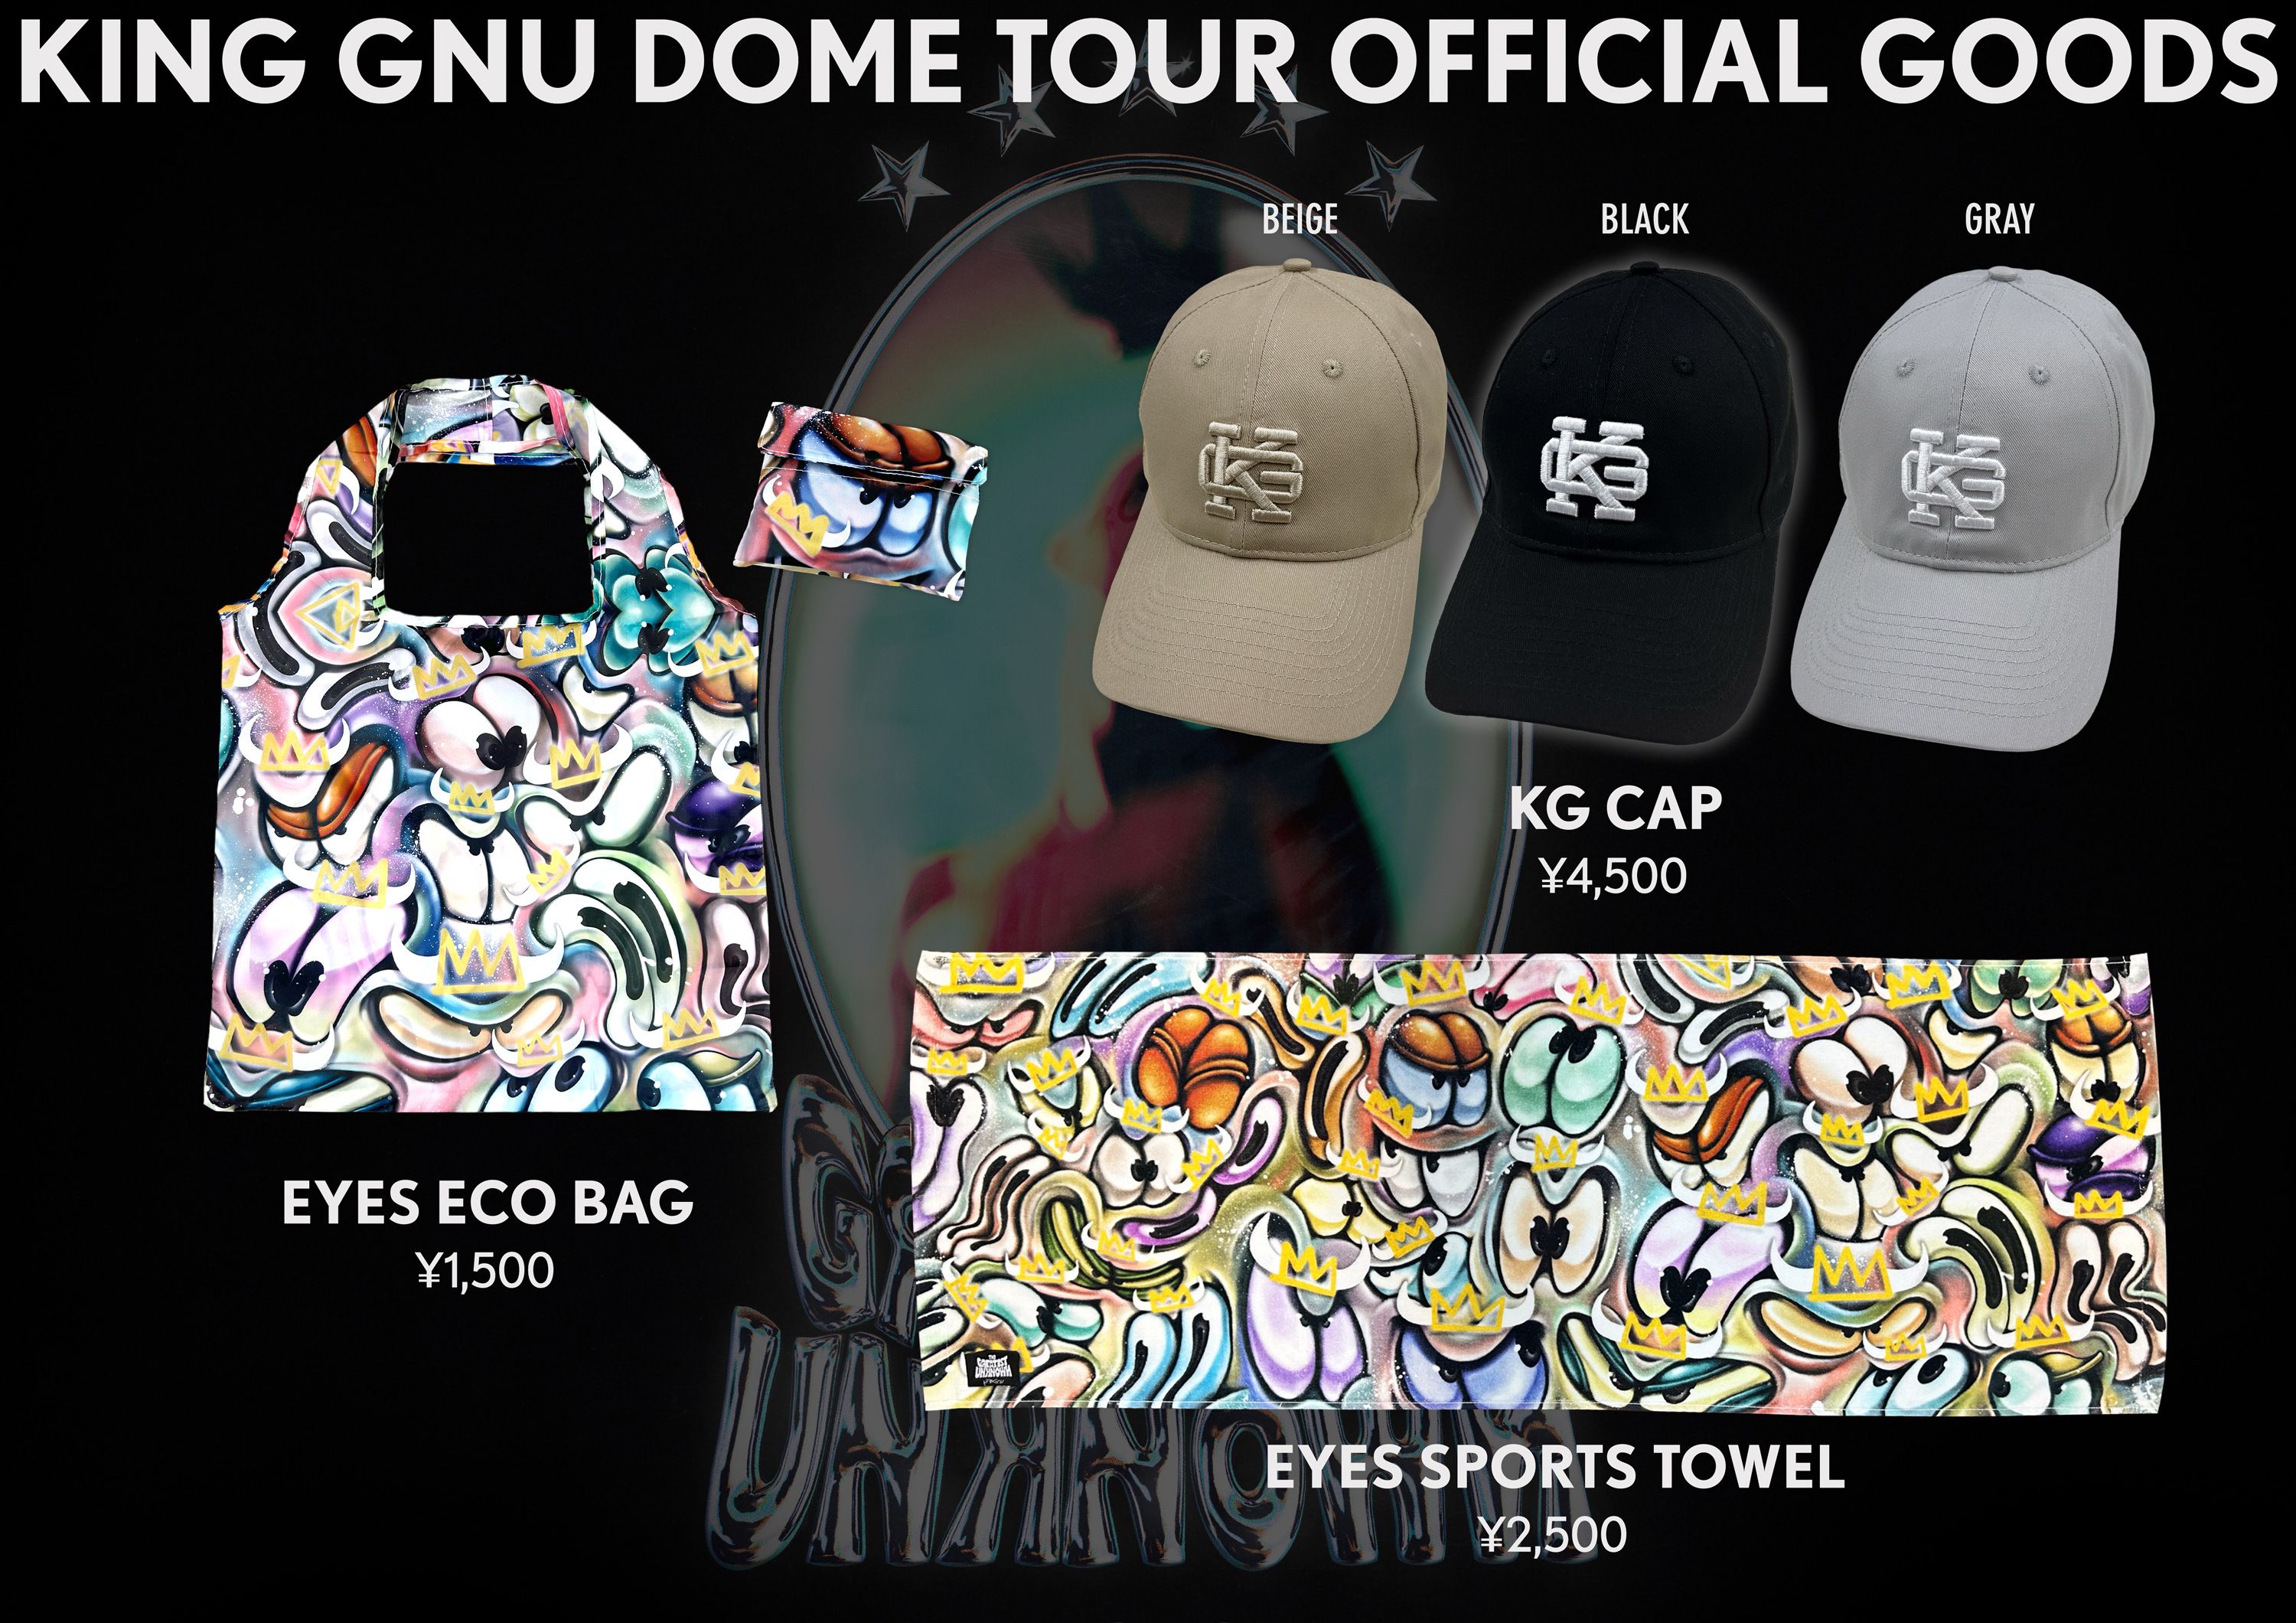 Goods】King Gnu Dome Tour「THE GREATEST UNKNOWN」第1弾オフィシャル